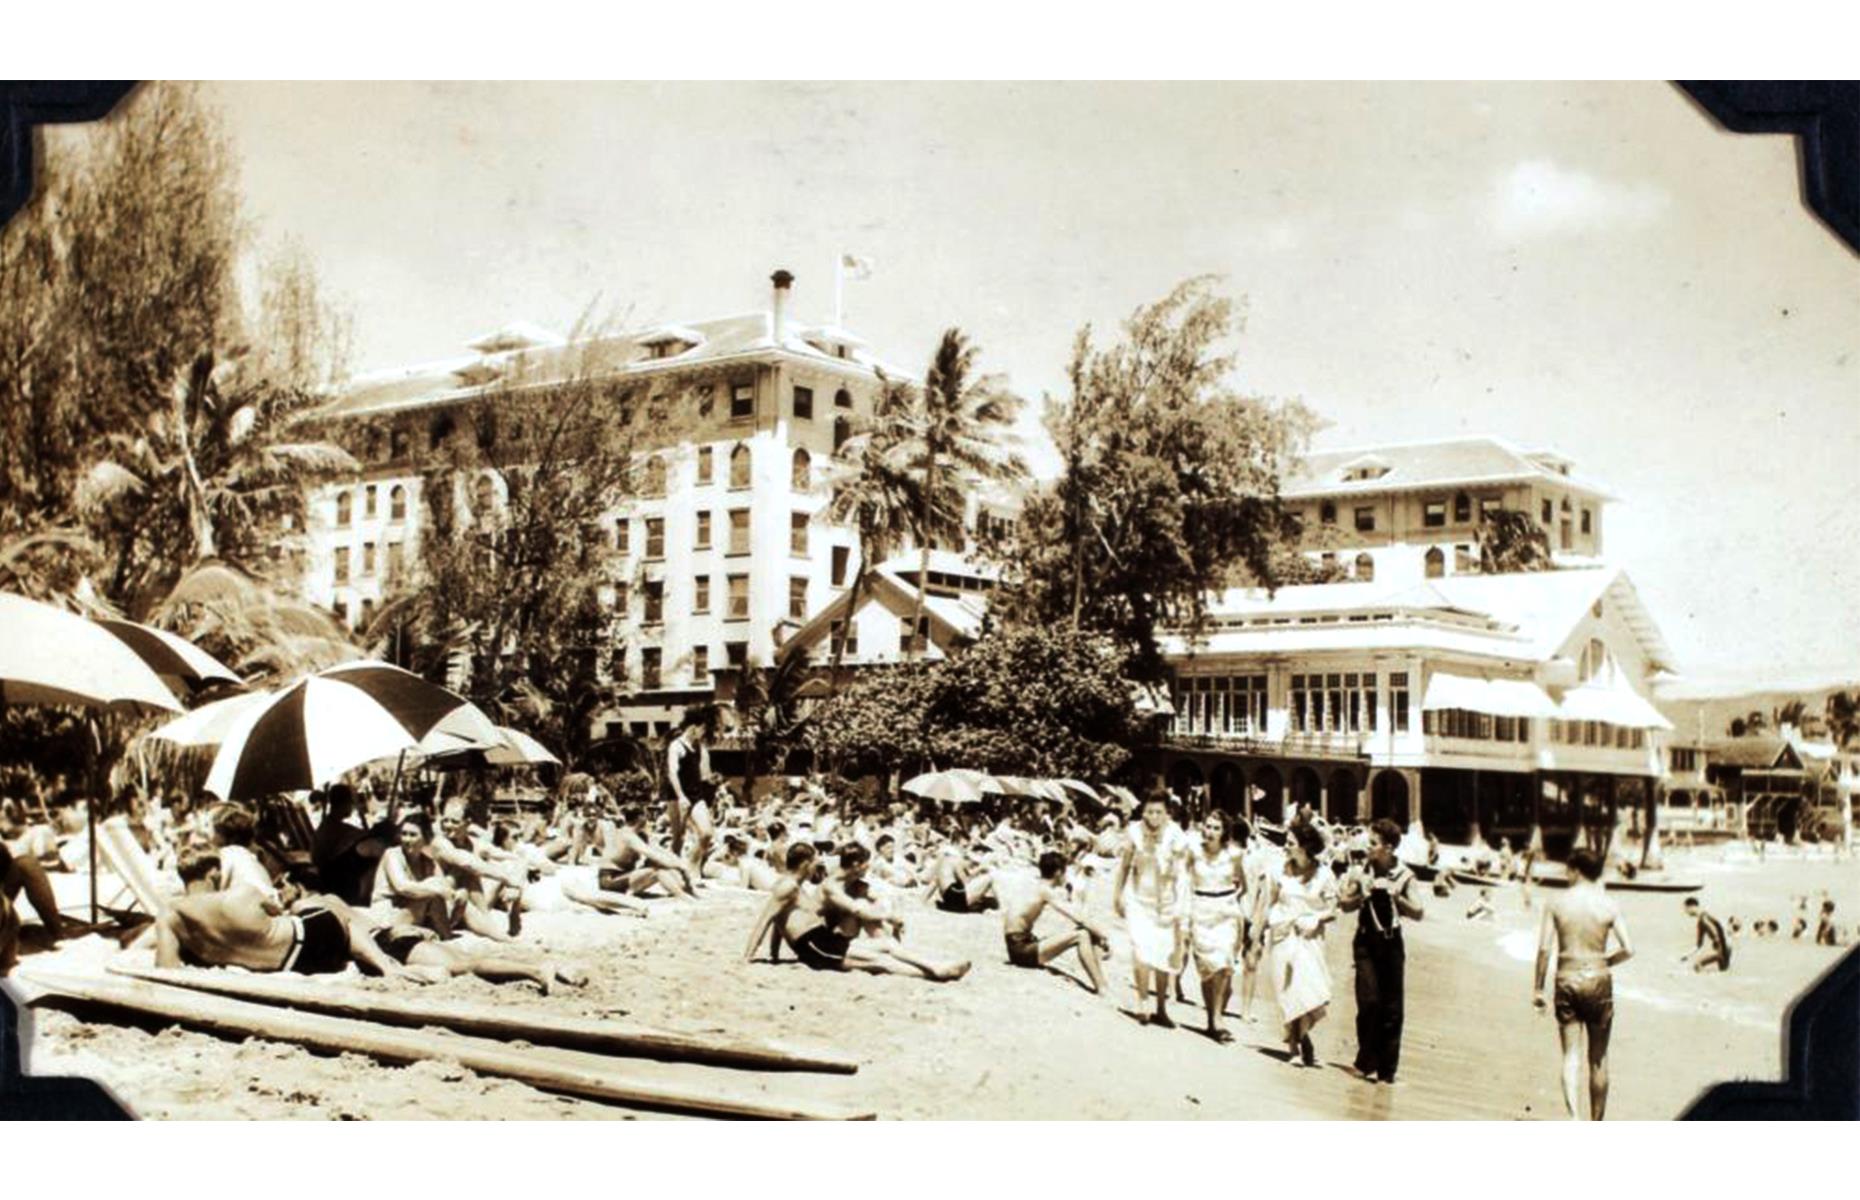 The Aloha State has long been a top place for a seaside getaway too – and an enduring hot spot has been Waikiki Beach, a glorious sandy strand hemming Honolulu's Waikiki neighborhood. Possibly taken circa 1930, this photo shows beach-goers gathered before the beautiful Moana Surfrider Hotel.